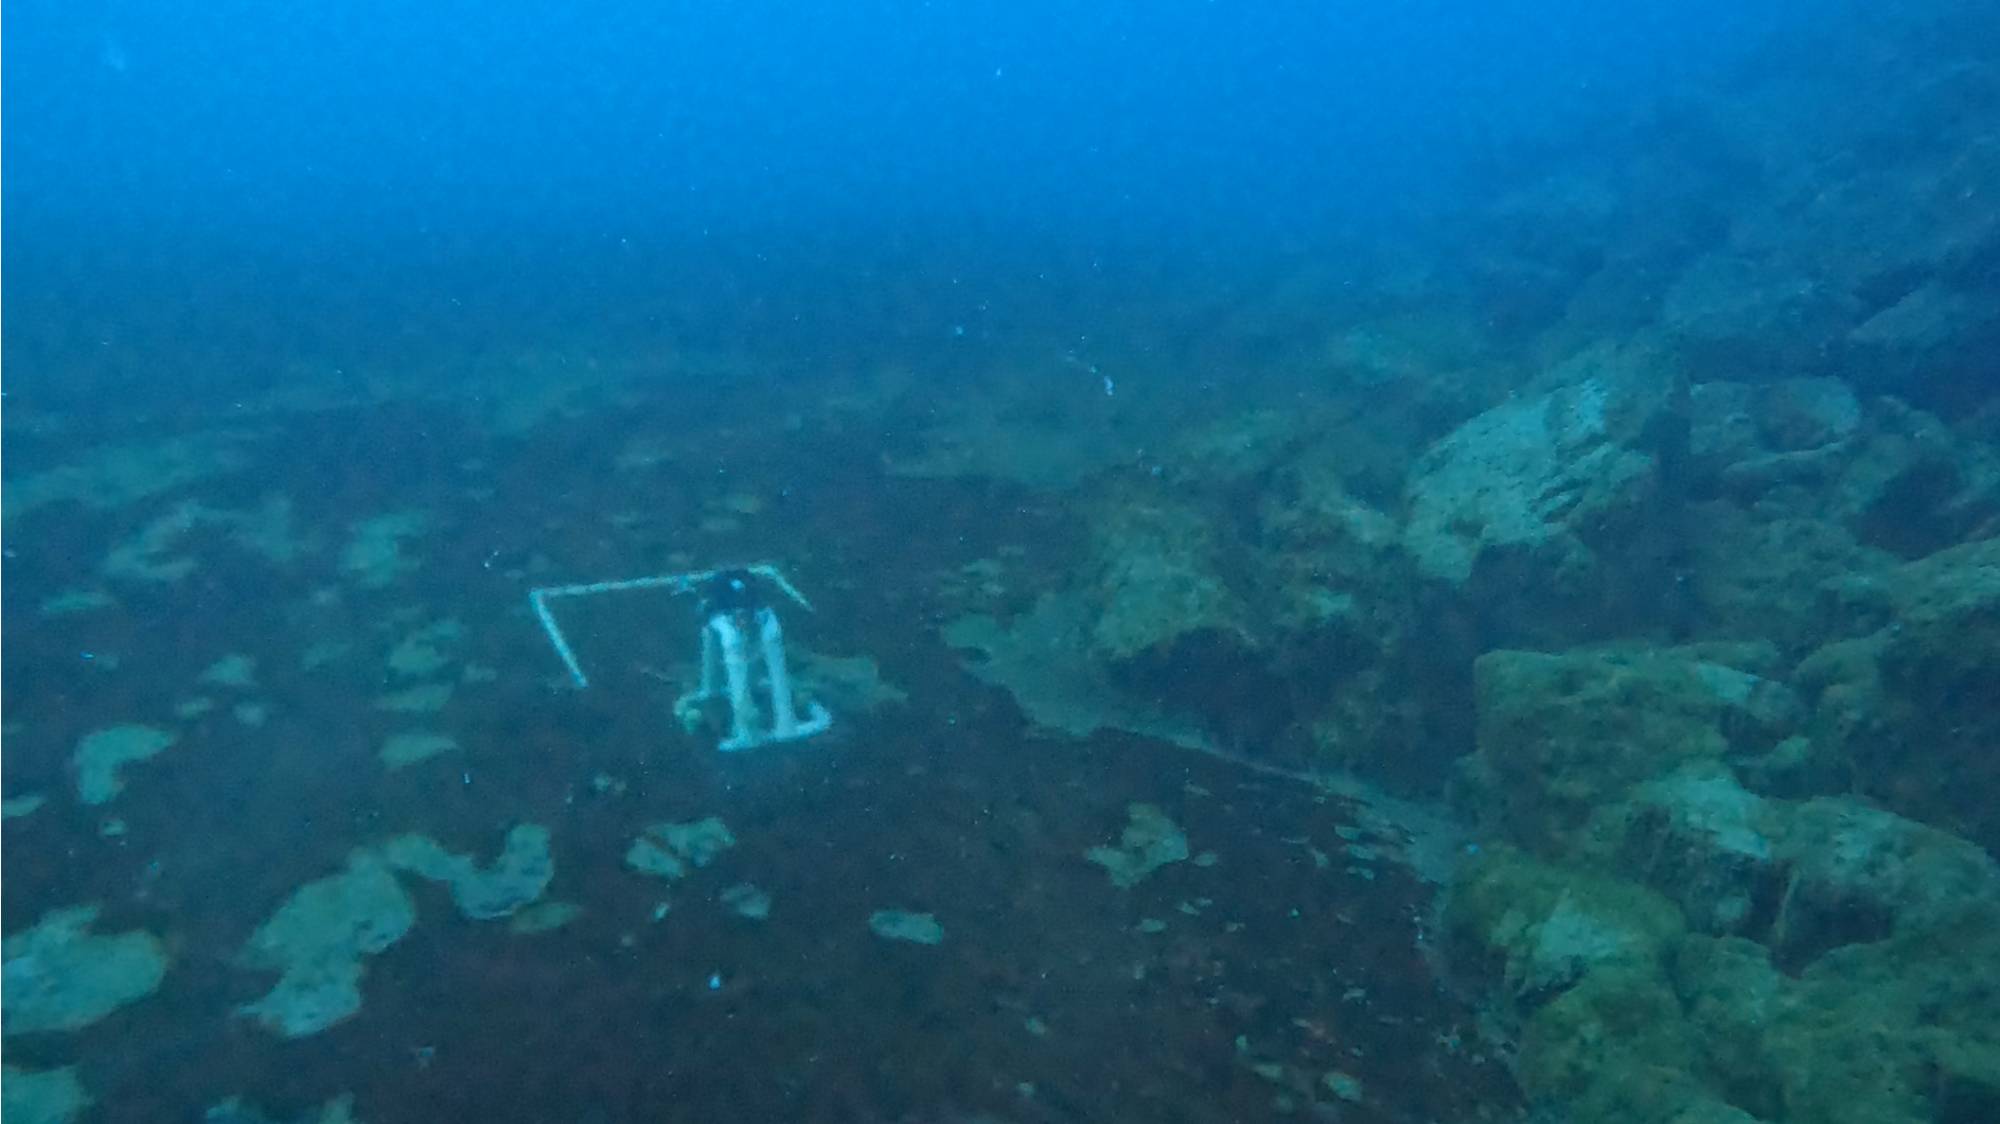 Underwater sinkhole with microbes